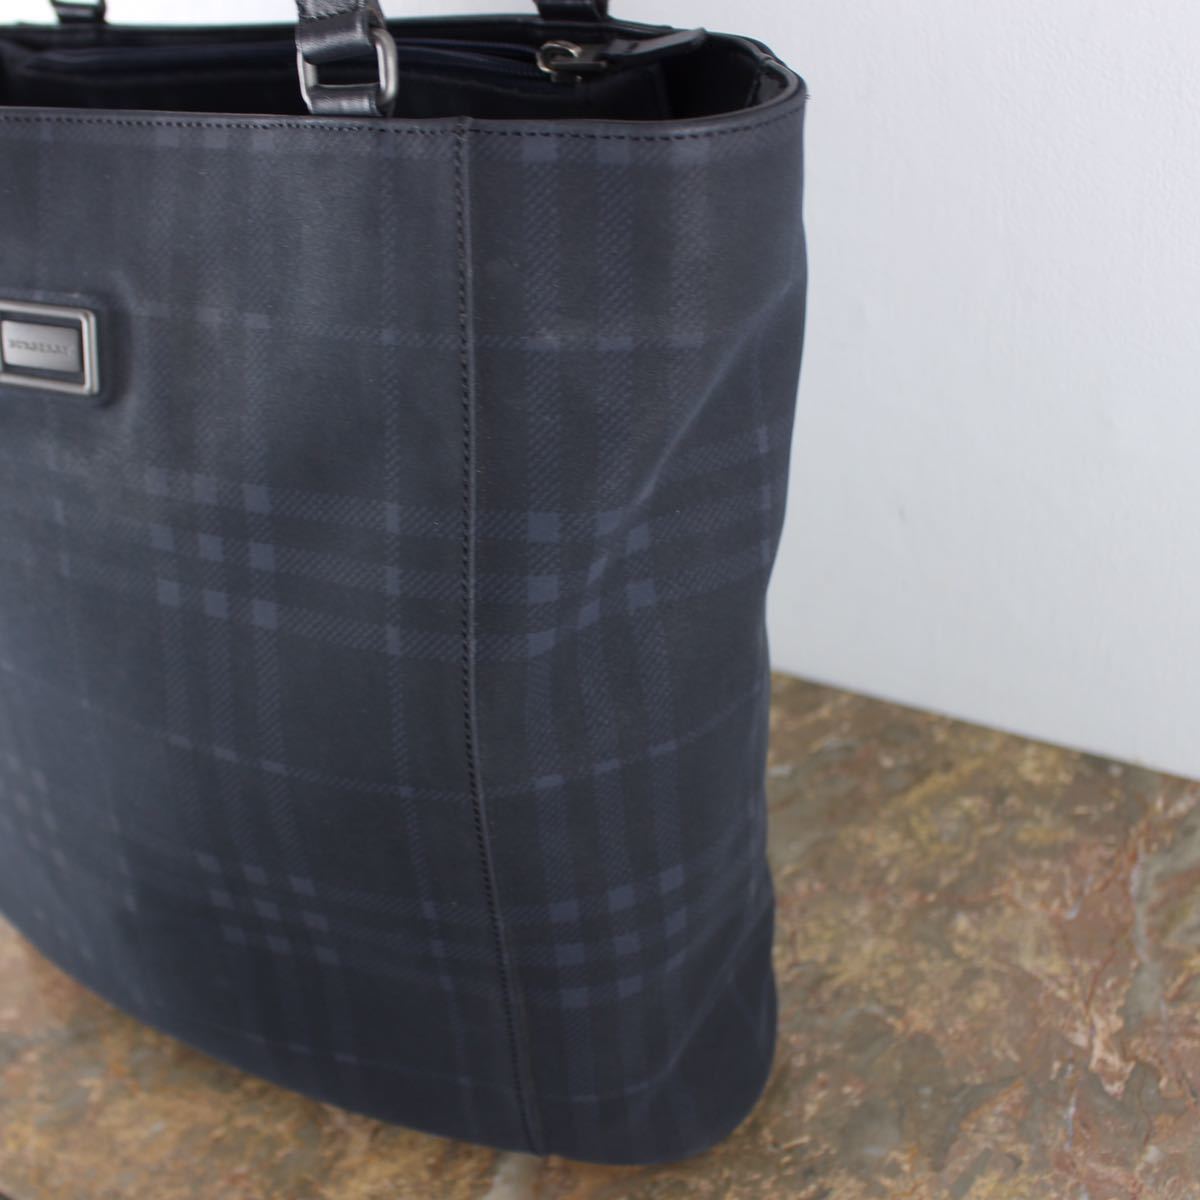 BURBERRY LONDON CHECK PATTERNED TOTE BAG MADE IN ITALY/バーバリーロンドンチェック柄トートバッグ